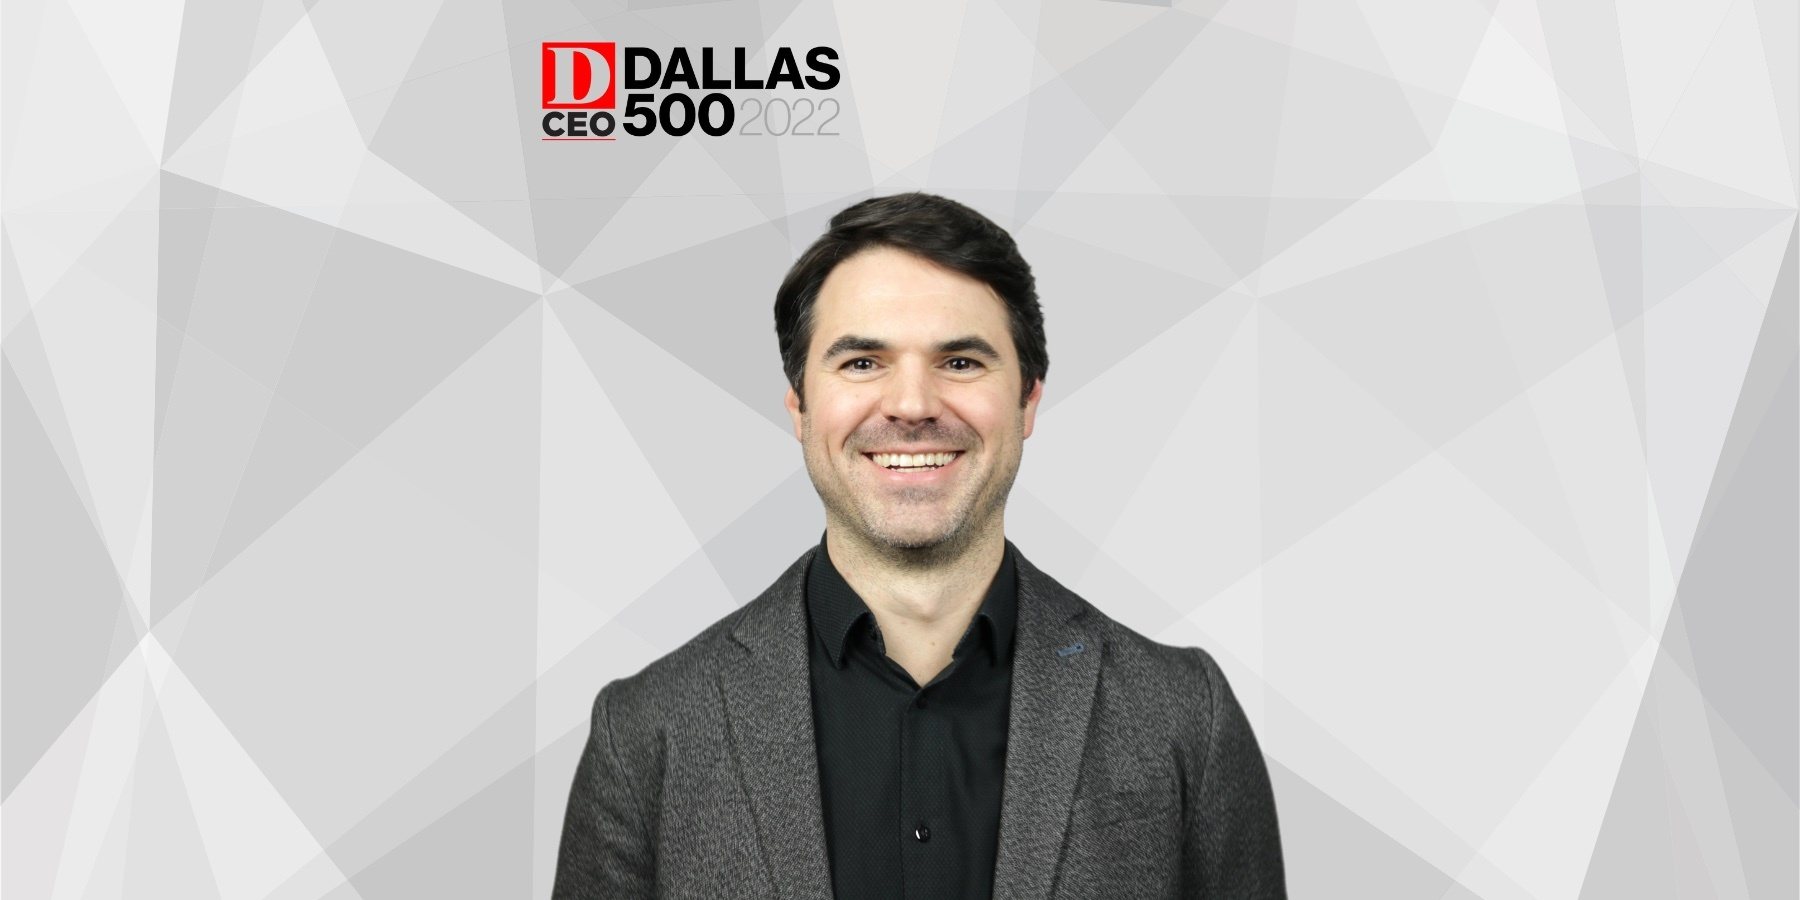 Featured image for “Sean O’Brien is named one of the Dallas 500 by DCEO”